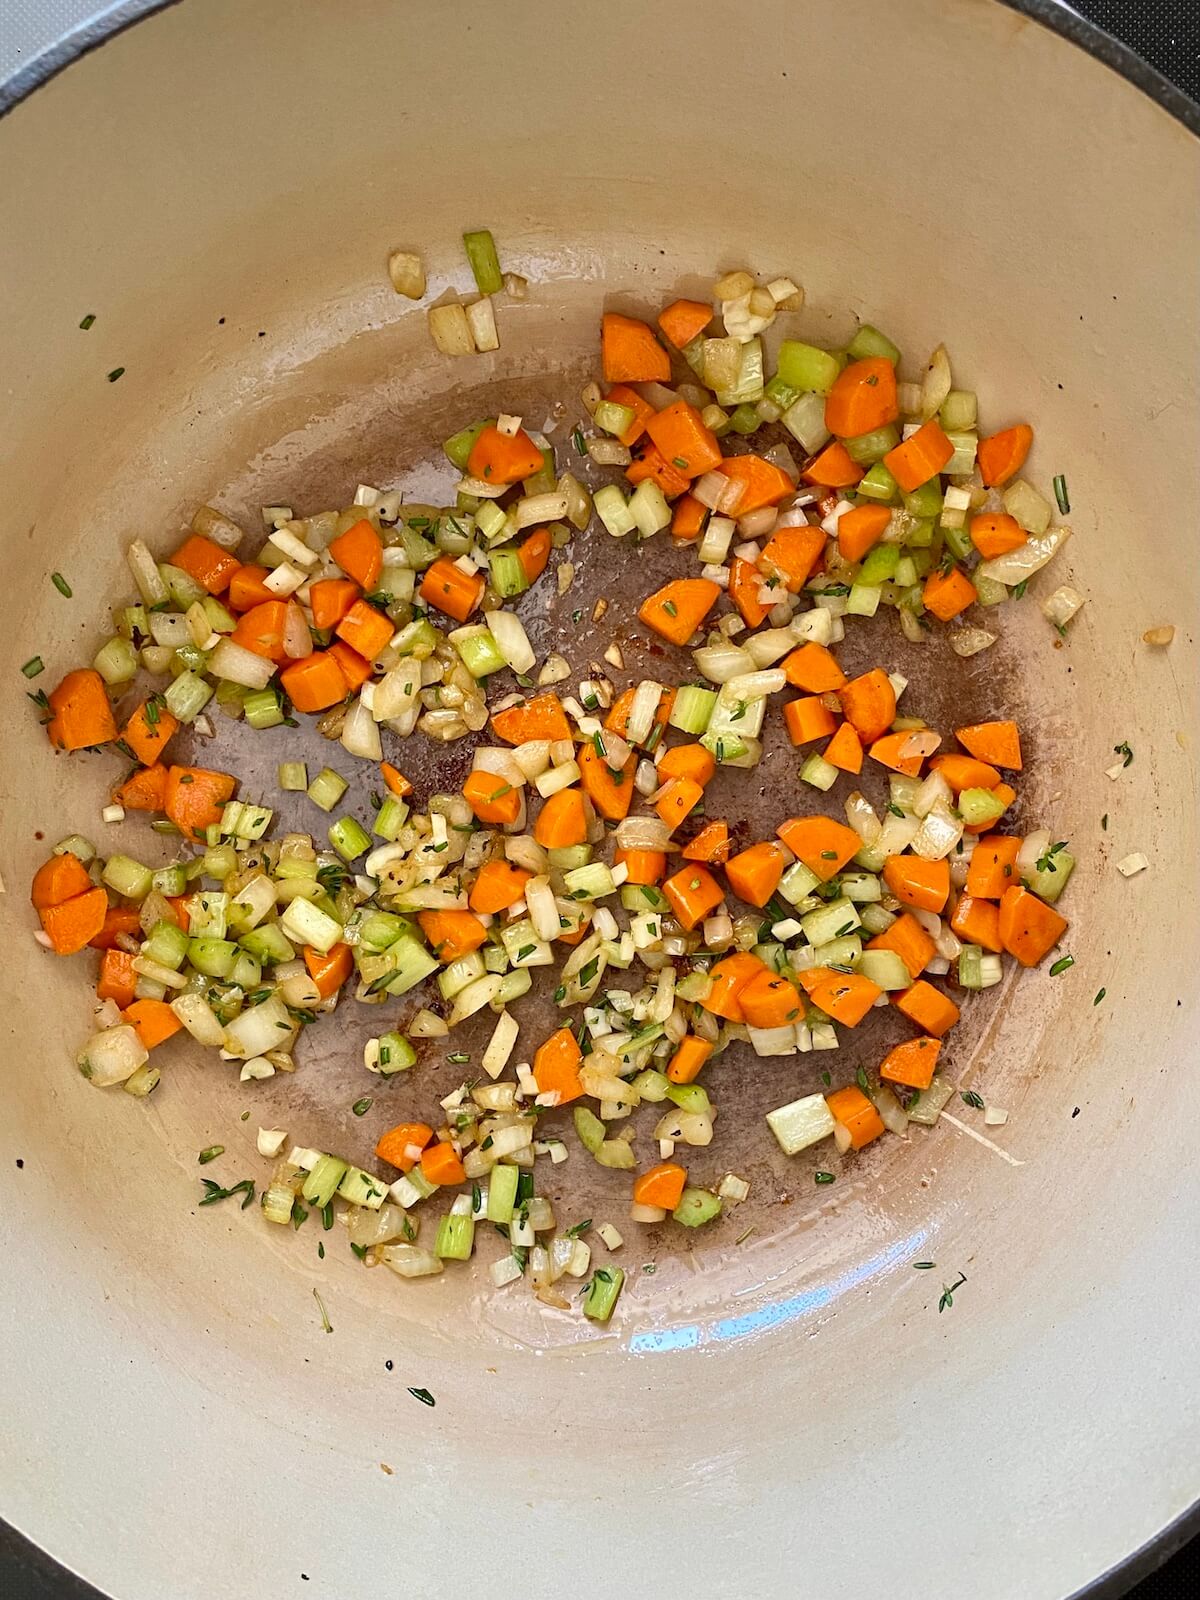 The mirepoix and aromatics being sautéed in the dutch oven.